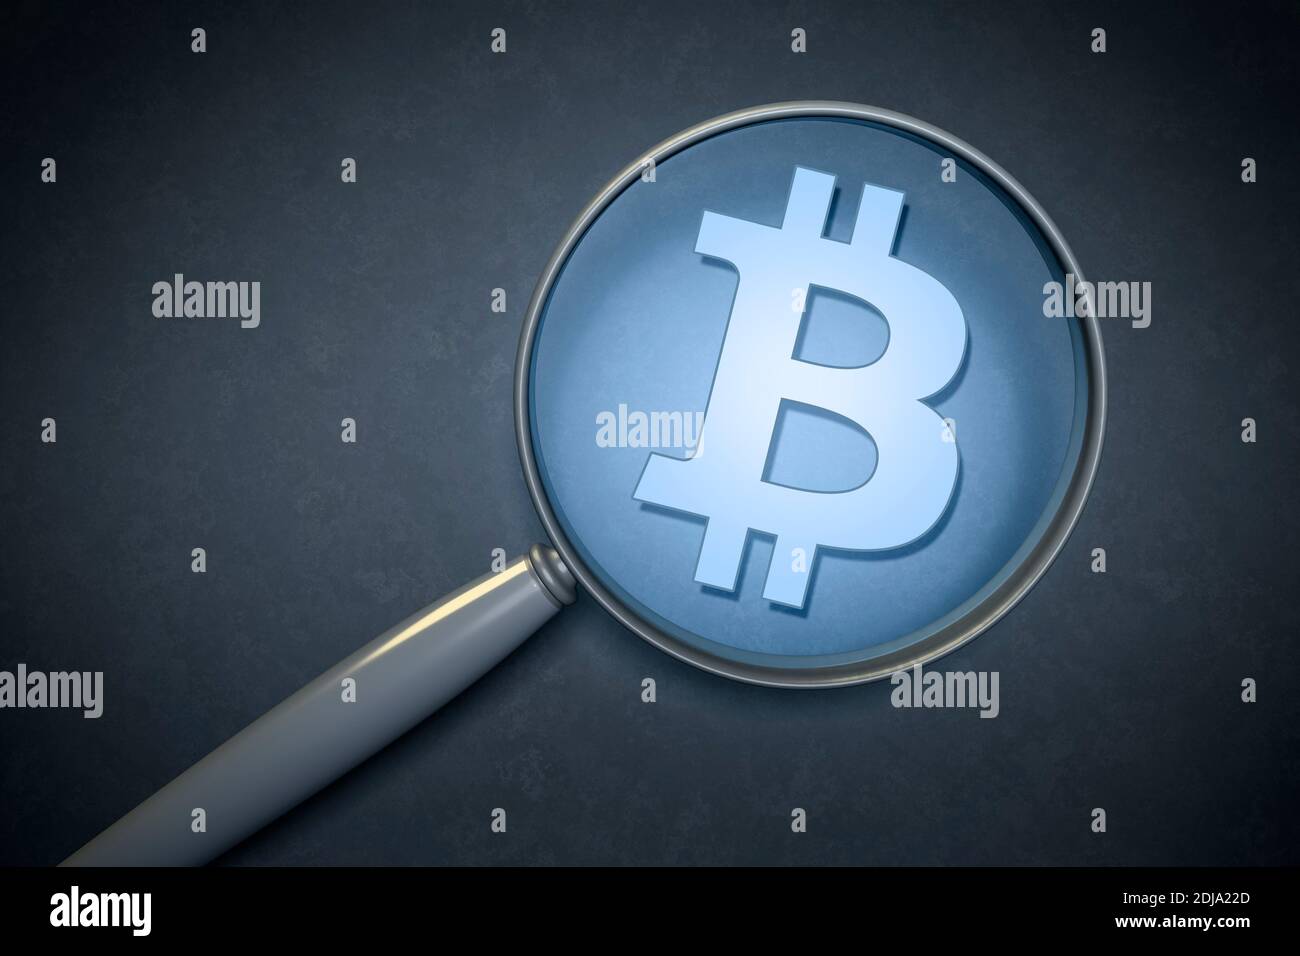 Illustration of a magnifying glass with a bitcoin sign Stock Photo